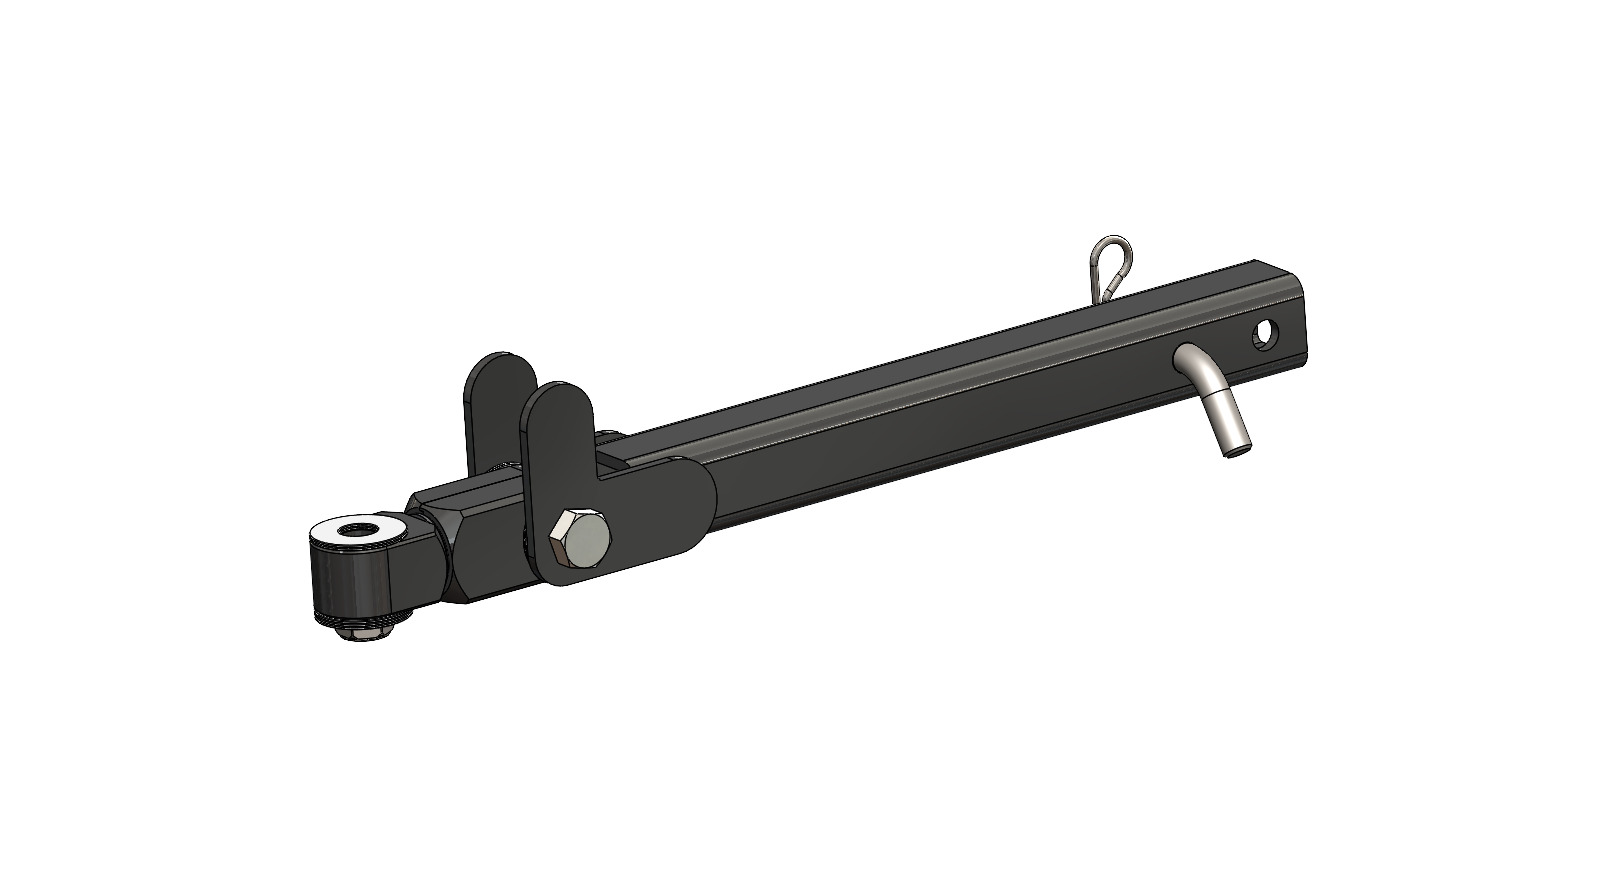 BlueOx Tow Bar Replacement Receiver Stinger, 2” Receiver, Long, Avail/Apollo/Ascent Tow Bars